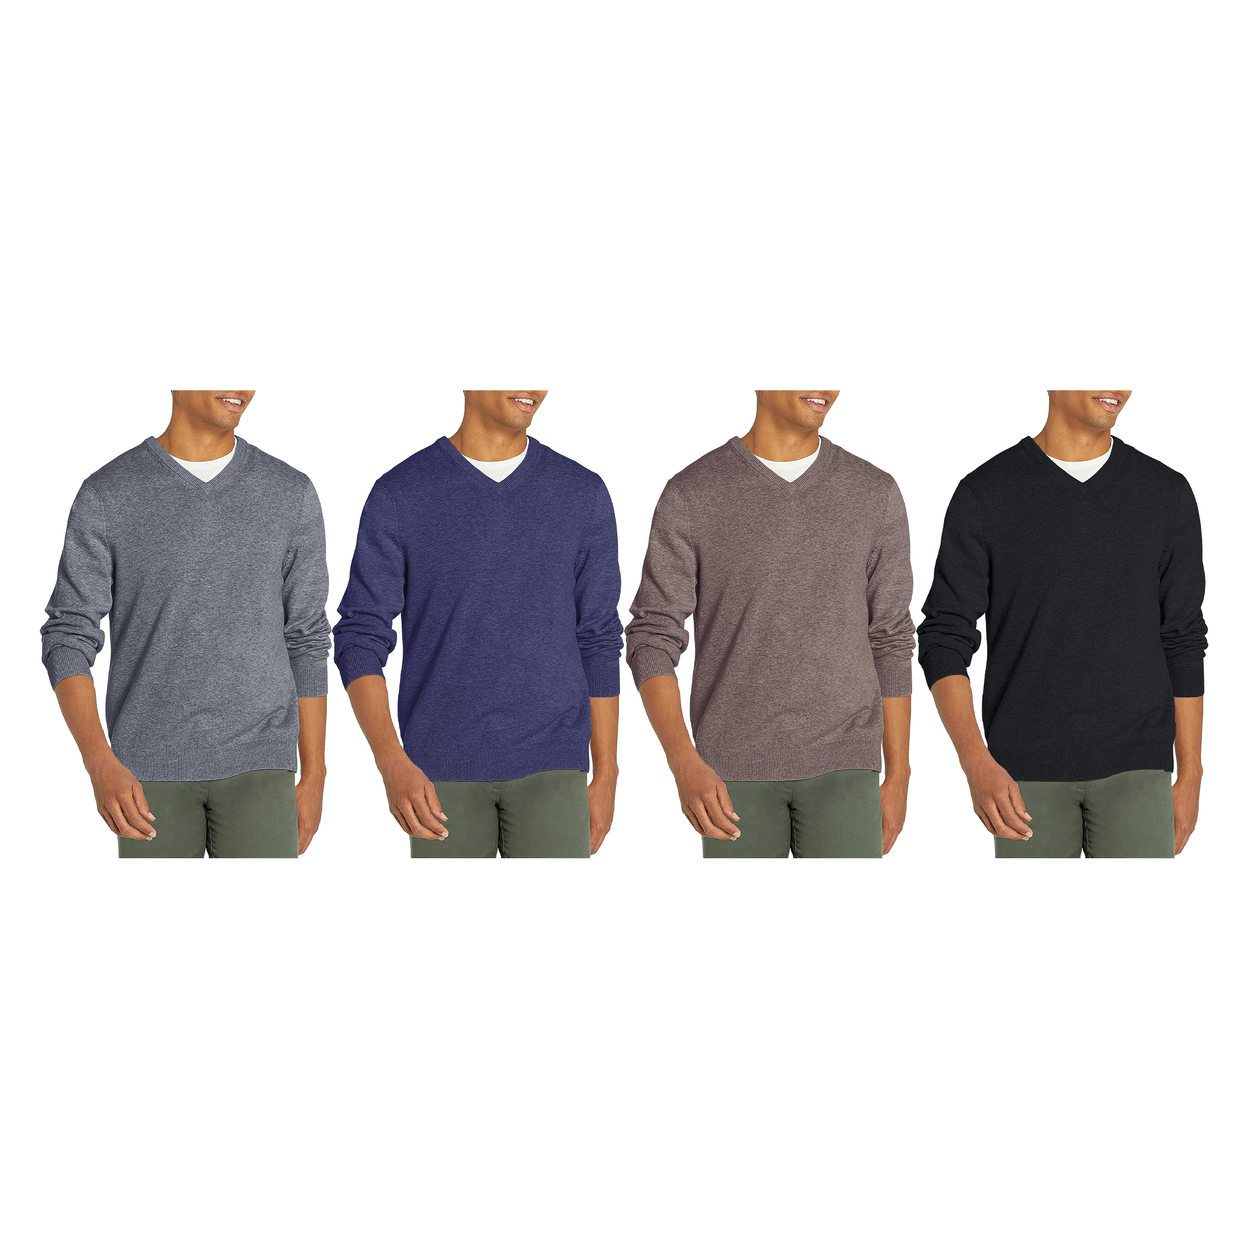 Men's Casual Ultra-Soft Slim Fit Warm Knit V-Neck Sweater - Brown, Large